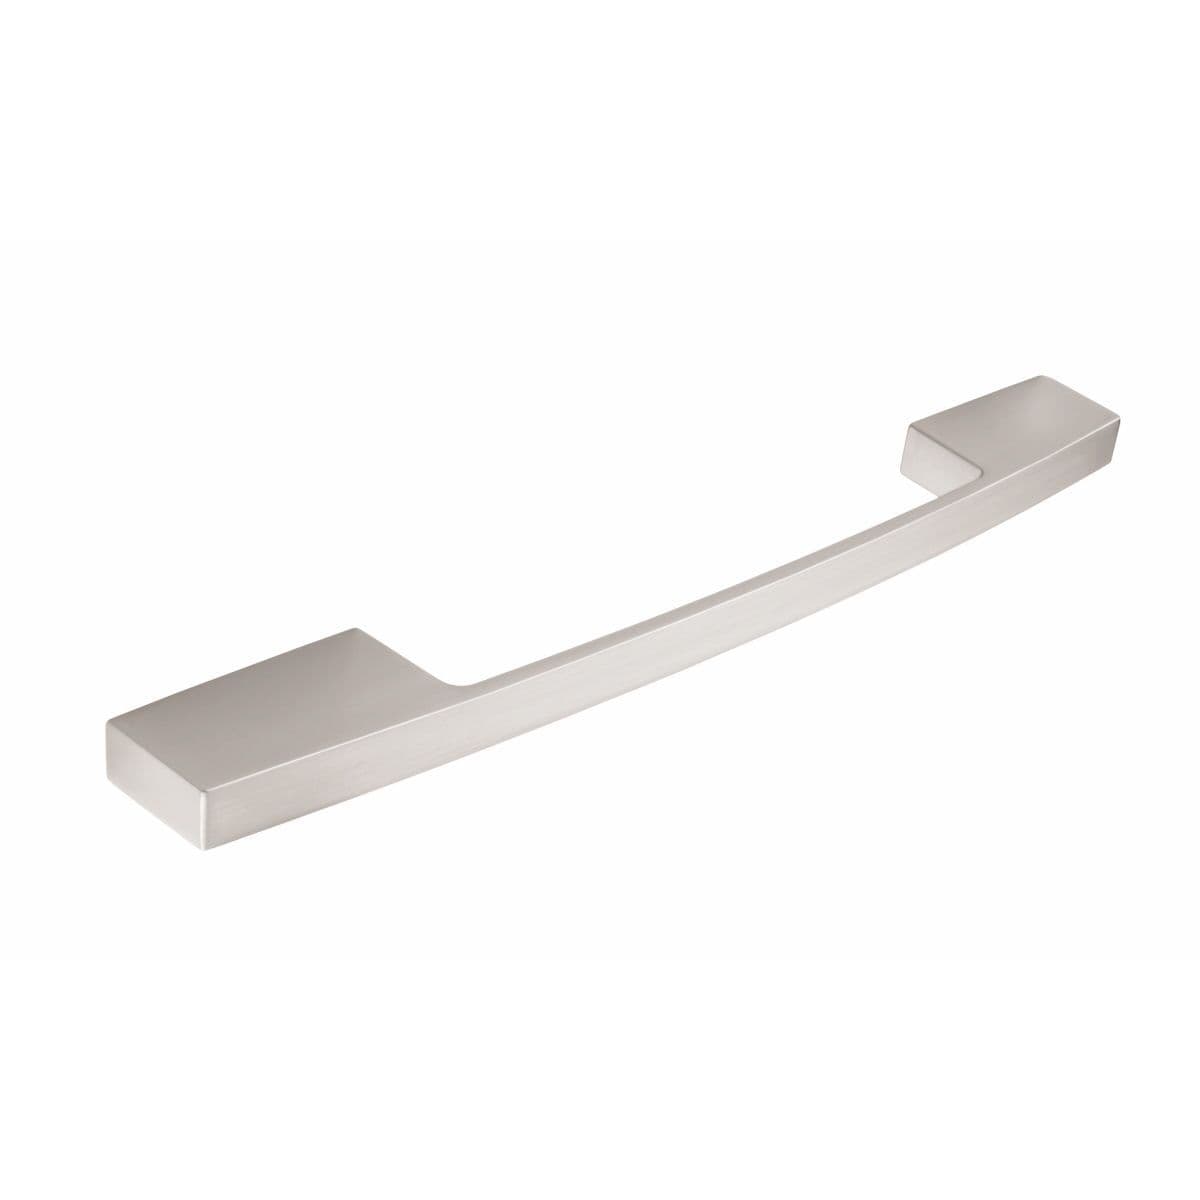 ELWICK D Cupboard Handle - 160mm h/c size -BRUSHED STAINLESS STEEL EFFECT finish (PWS H733.160.SS)